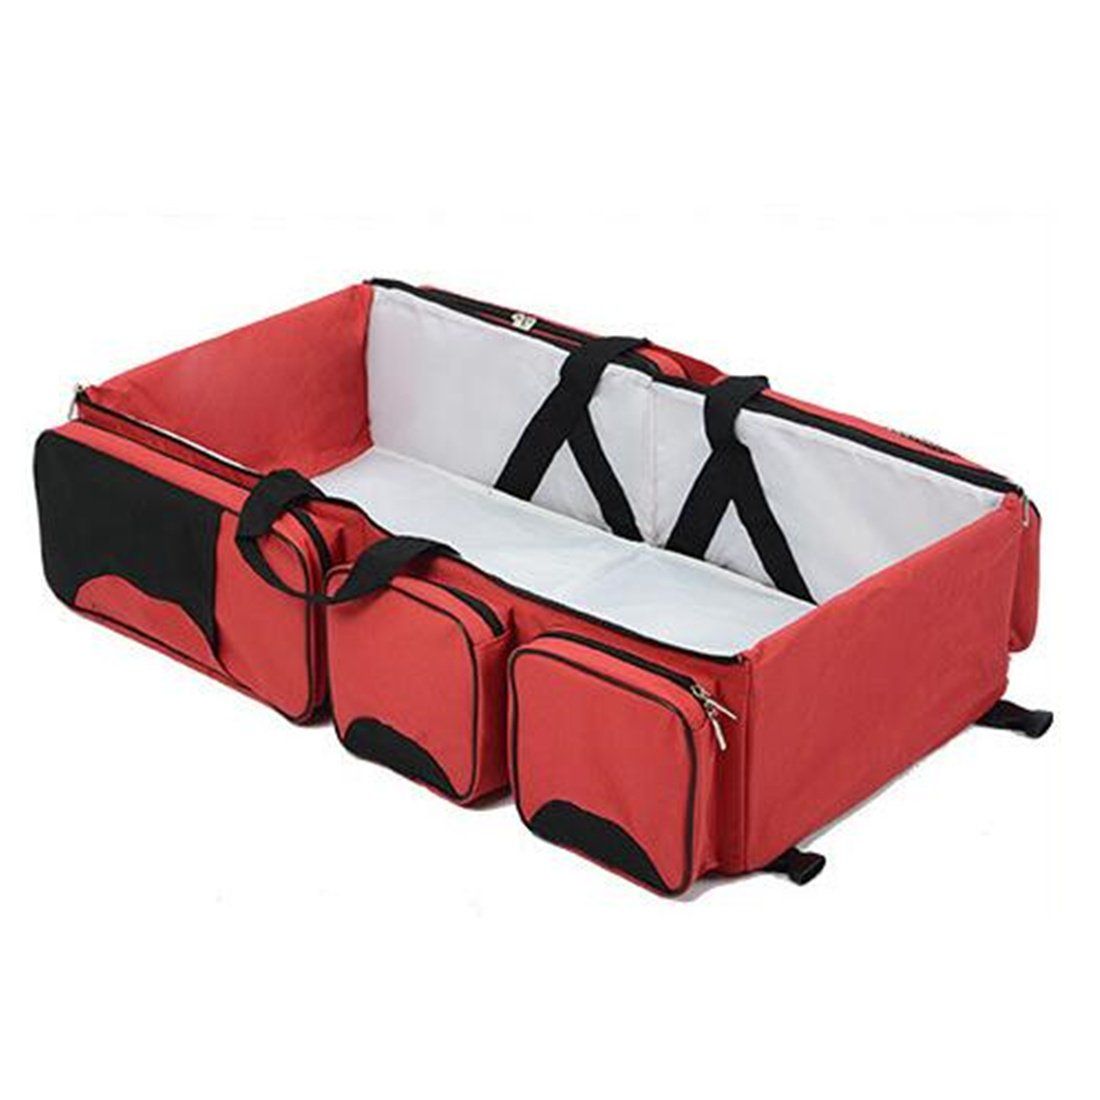 red travel bed